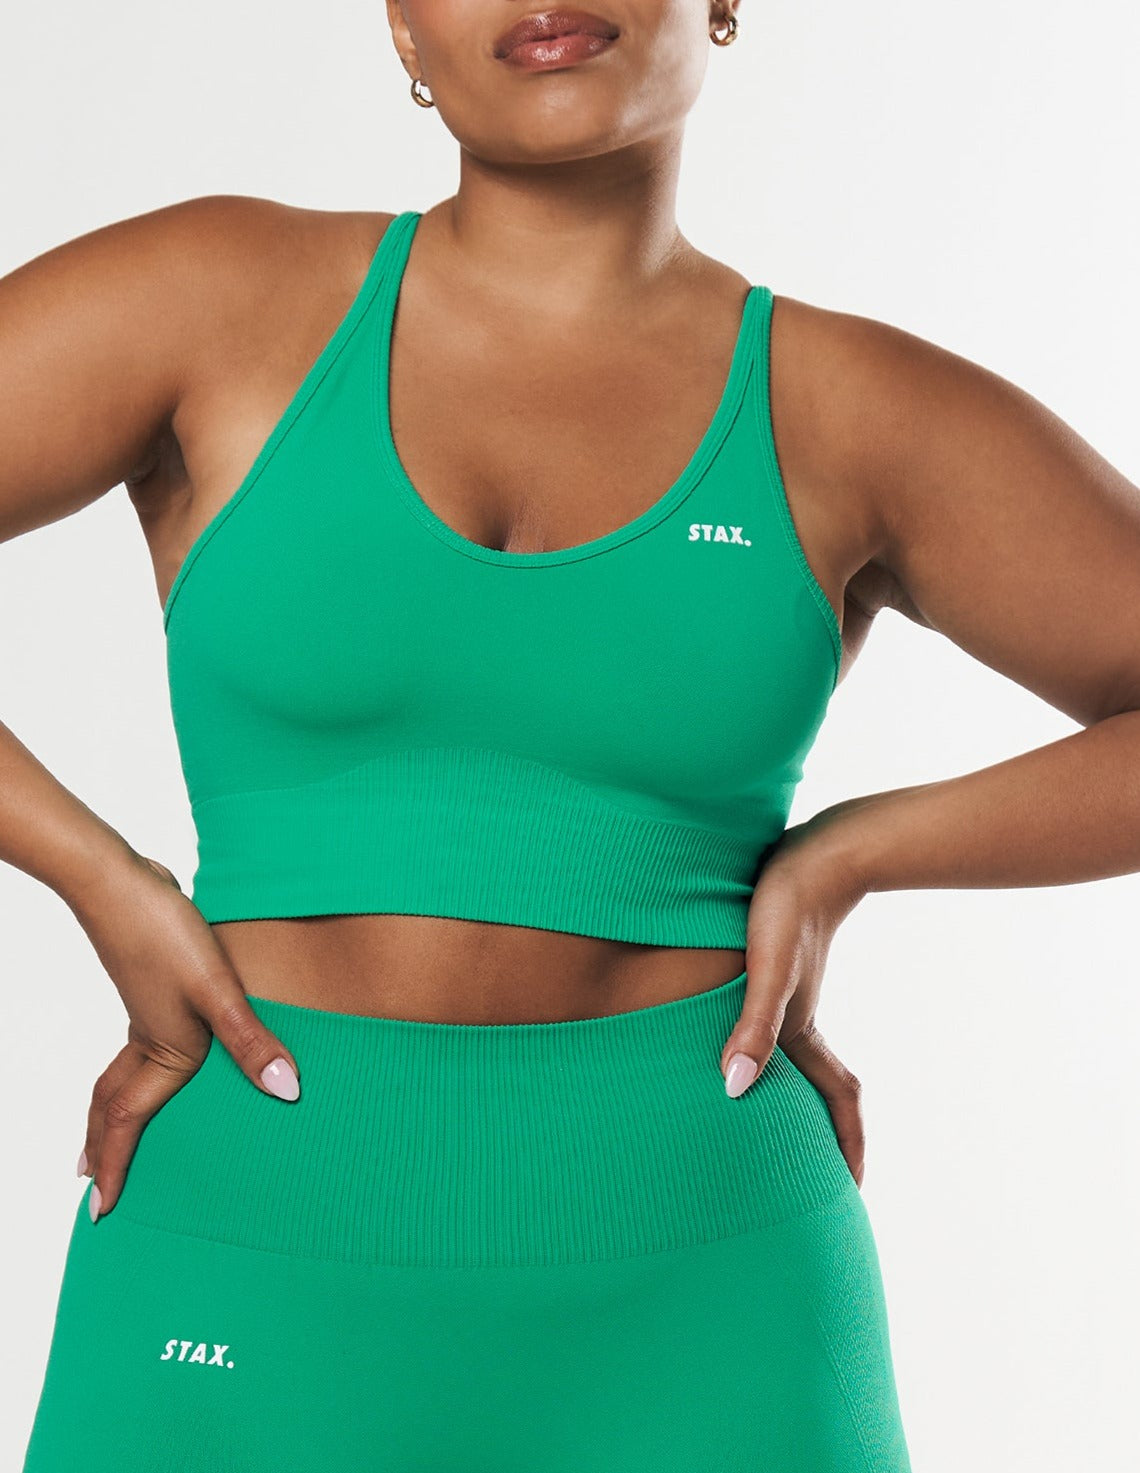 stax-ps-strappy-crop-green